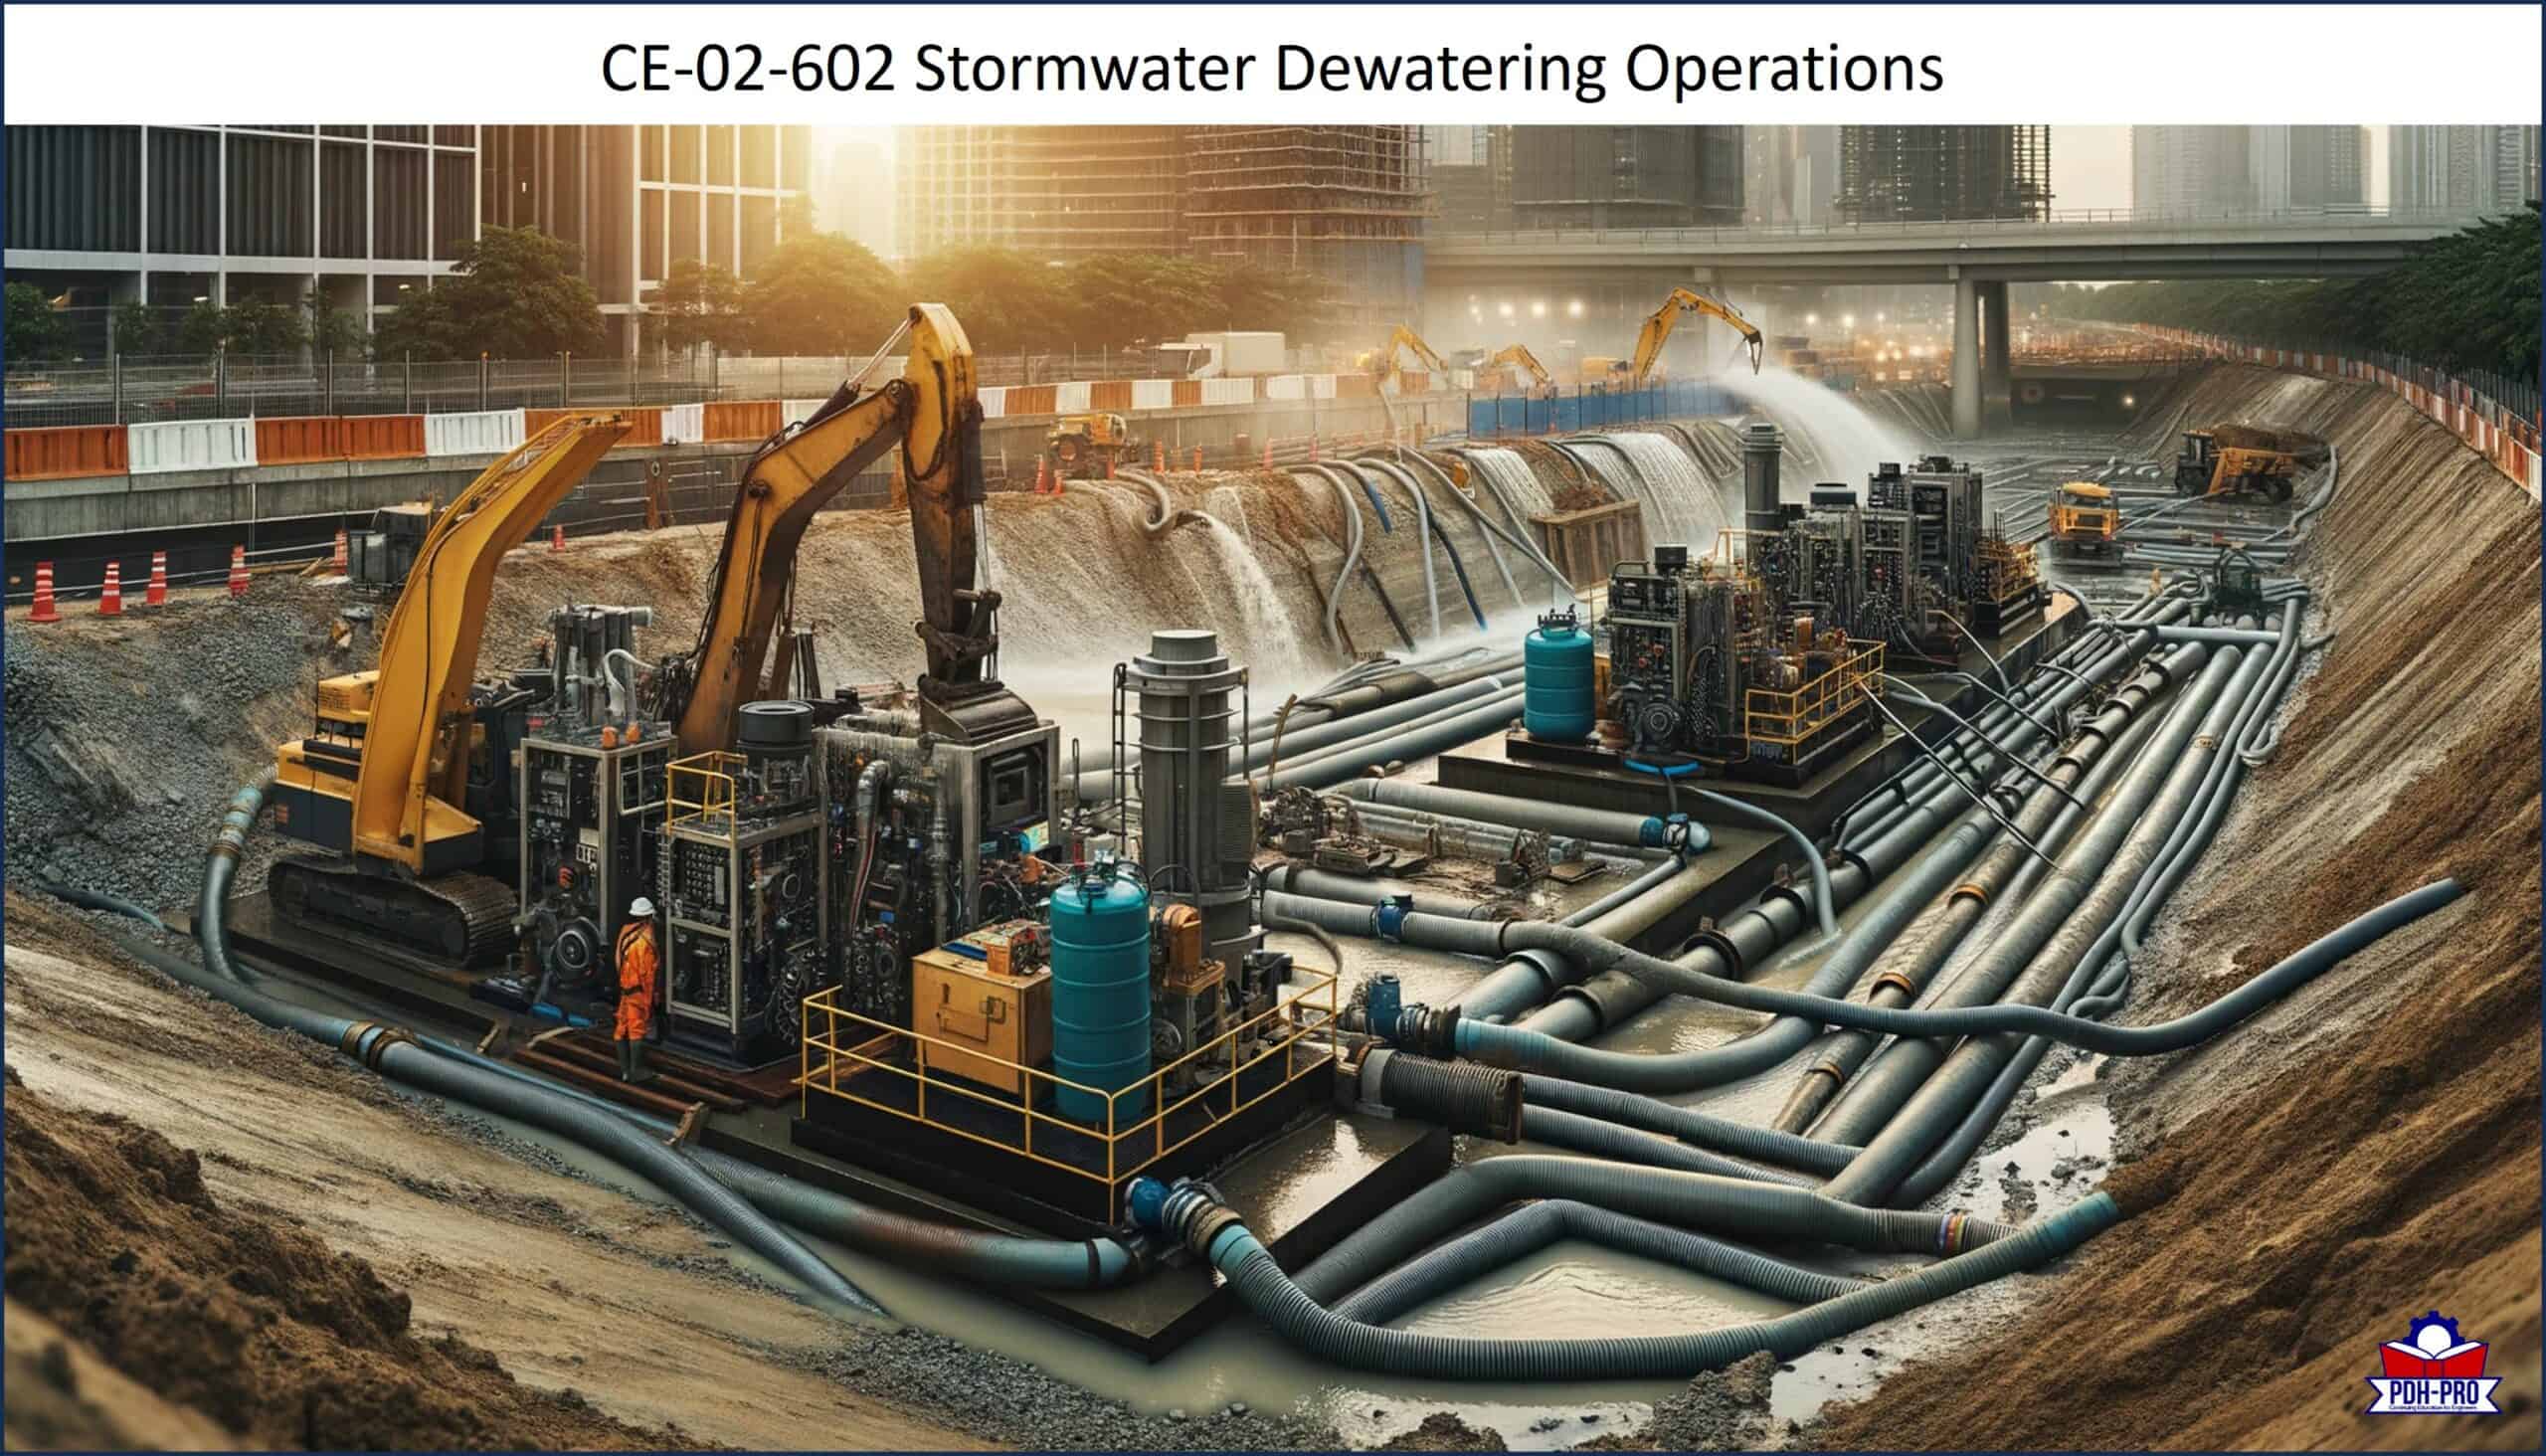 Stormwater Dewatering Operations